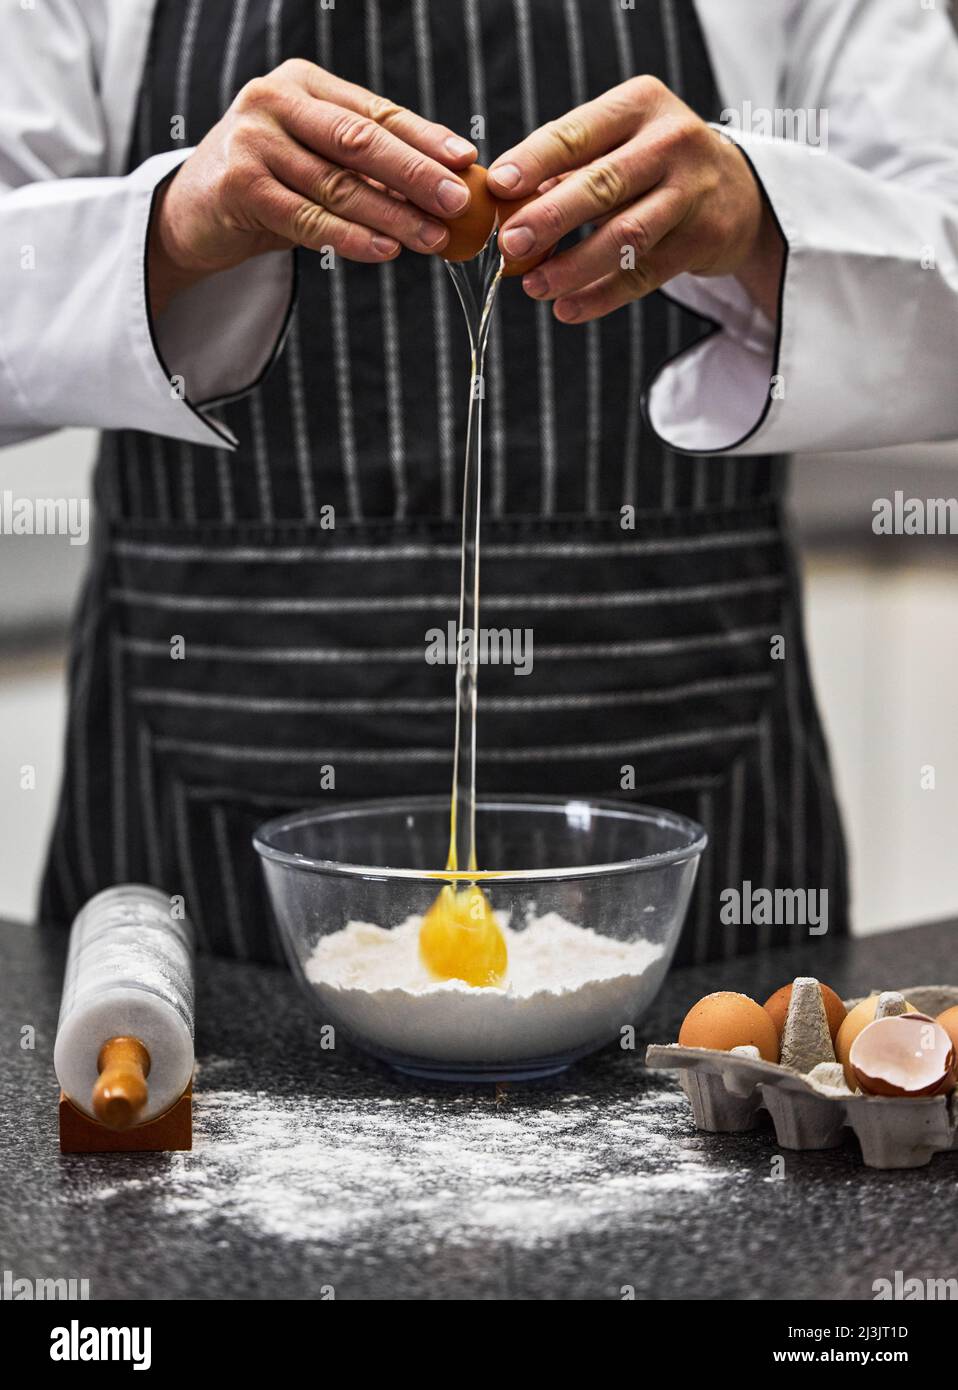 Whatever happens, well always have pasta. Shot of an unrecognisable man preparing freshly made pasta. Stock Photo